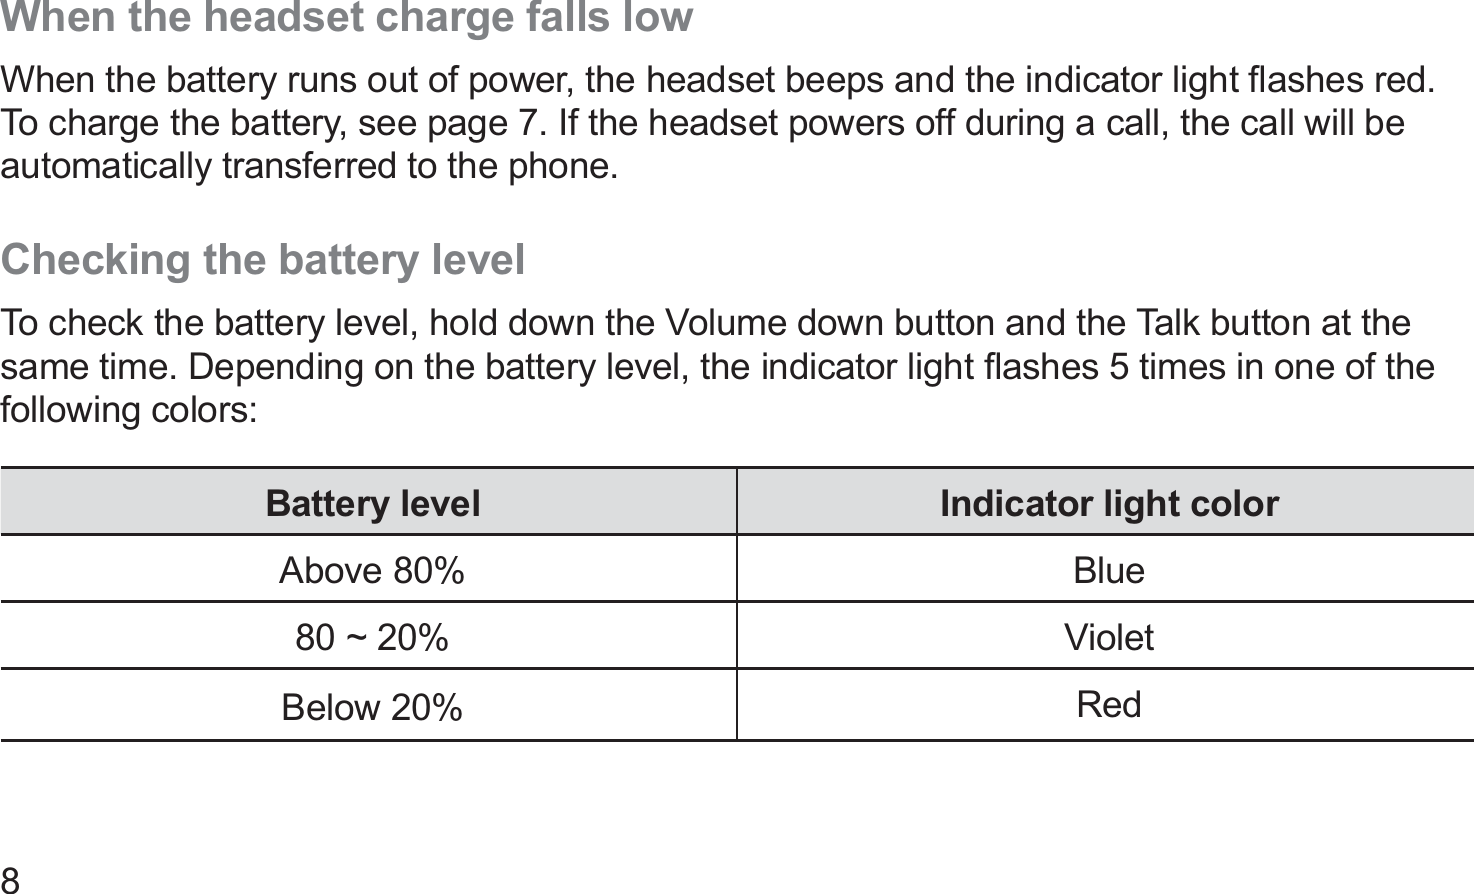 8When the headset charge falls lowWhen the battery runs out of power, the headset beeps and the indicator light ﬂashes red. To charge the battery, see page 7. If the headset powers off during a call, the call will be automatically transferred to the phone.Checking the battery levelTo check the battery level, hold down the Volume down button and the Talk button at the same time. Depending on the battery level, the indicator light ﬂashes 5 times in one of the following colors:Battery level Indicator light colorAbove 80% Blue80 ~ 20%  VioletBelow 20% Red